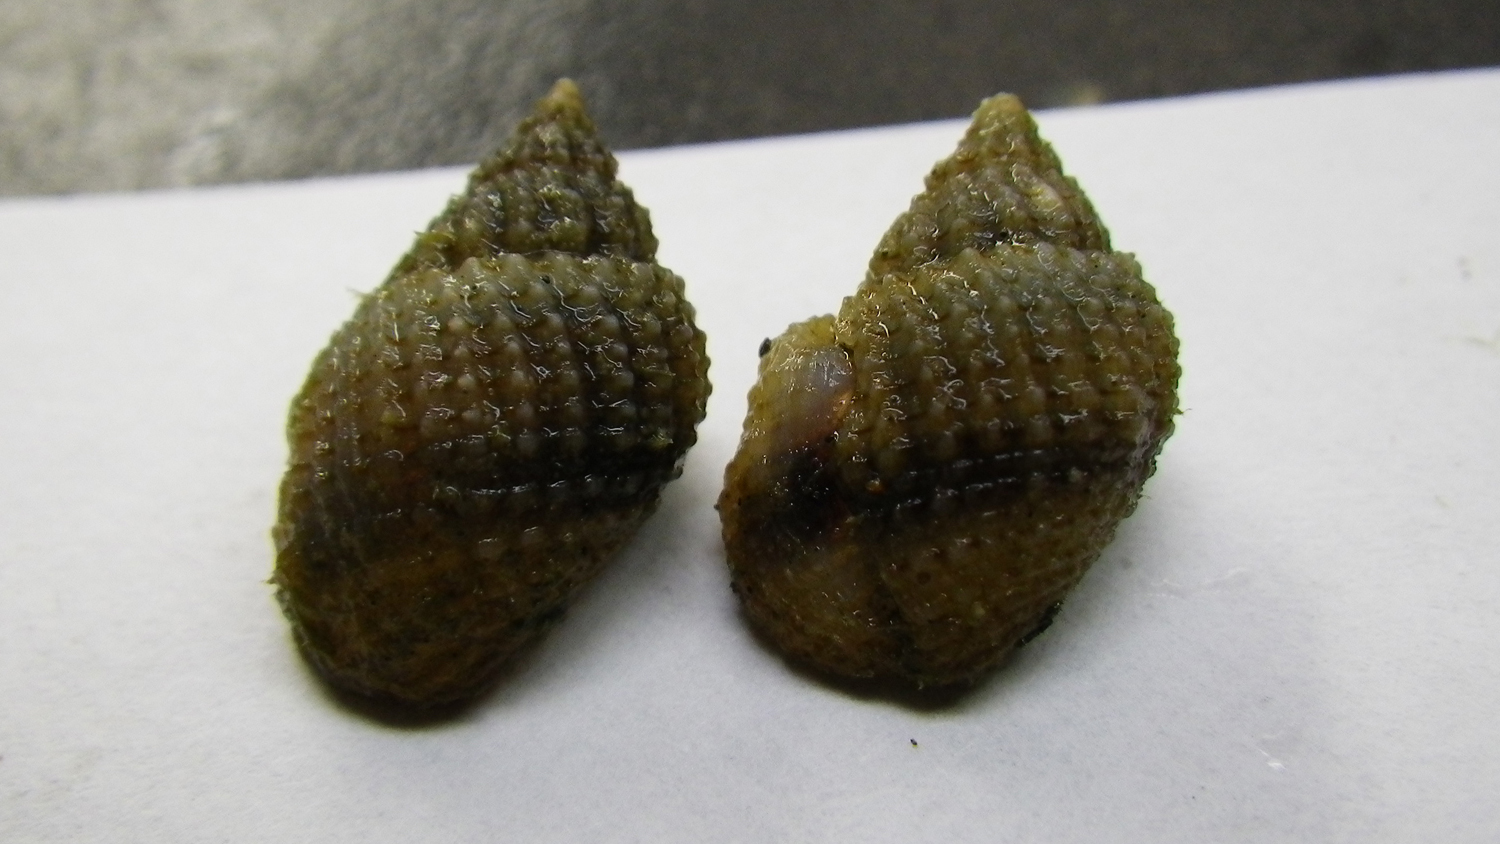 Snails of the Lavigeria species. The two snails are the same species, but the one on the right has a crab scar (it must have survived a pretty big attack!). Photo © Ellen Hamann